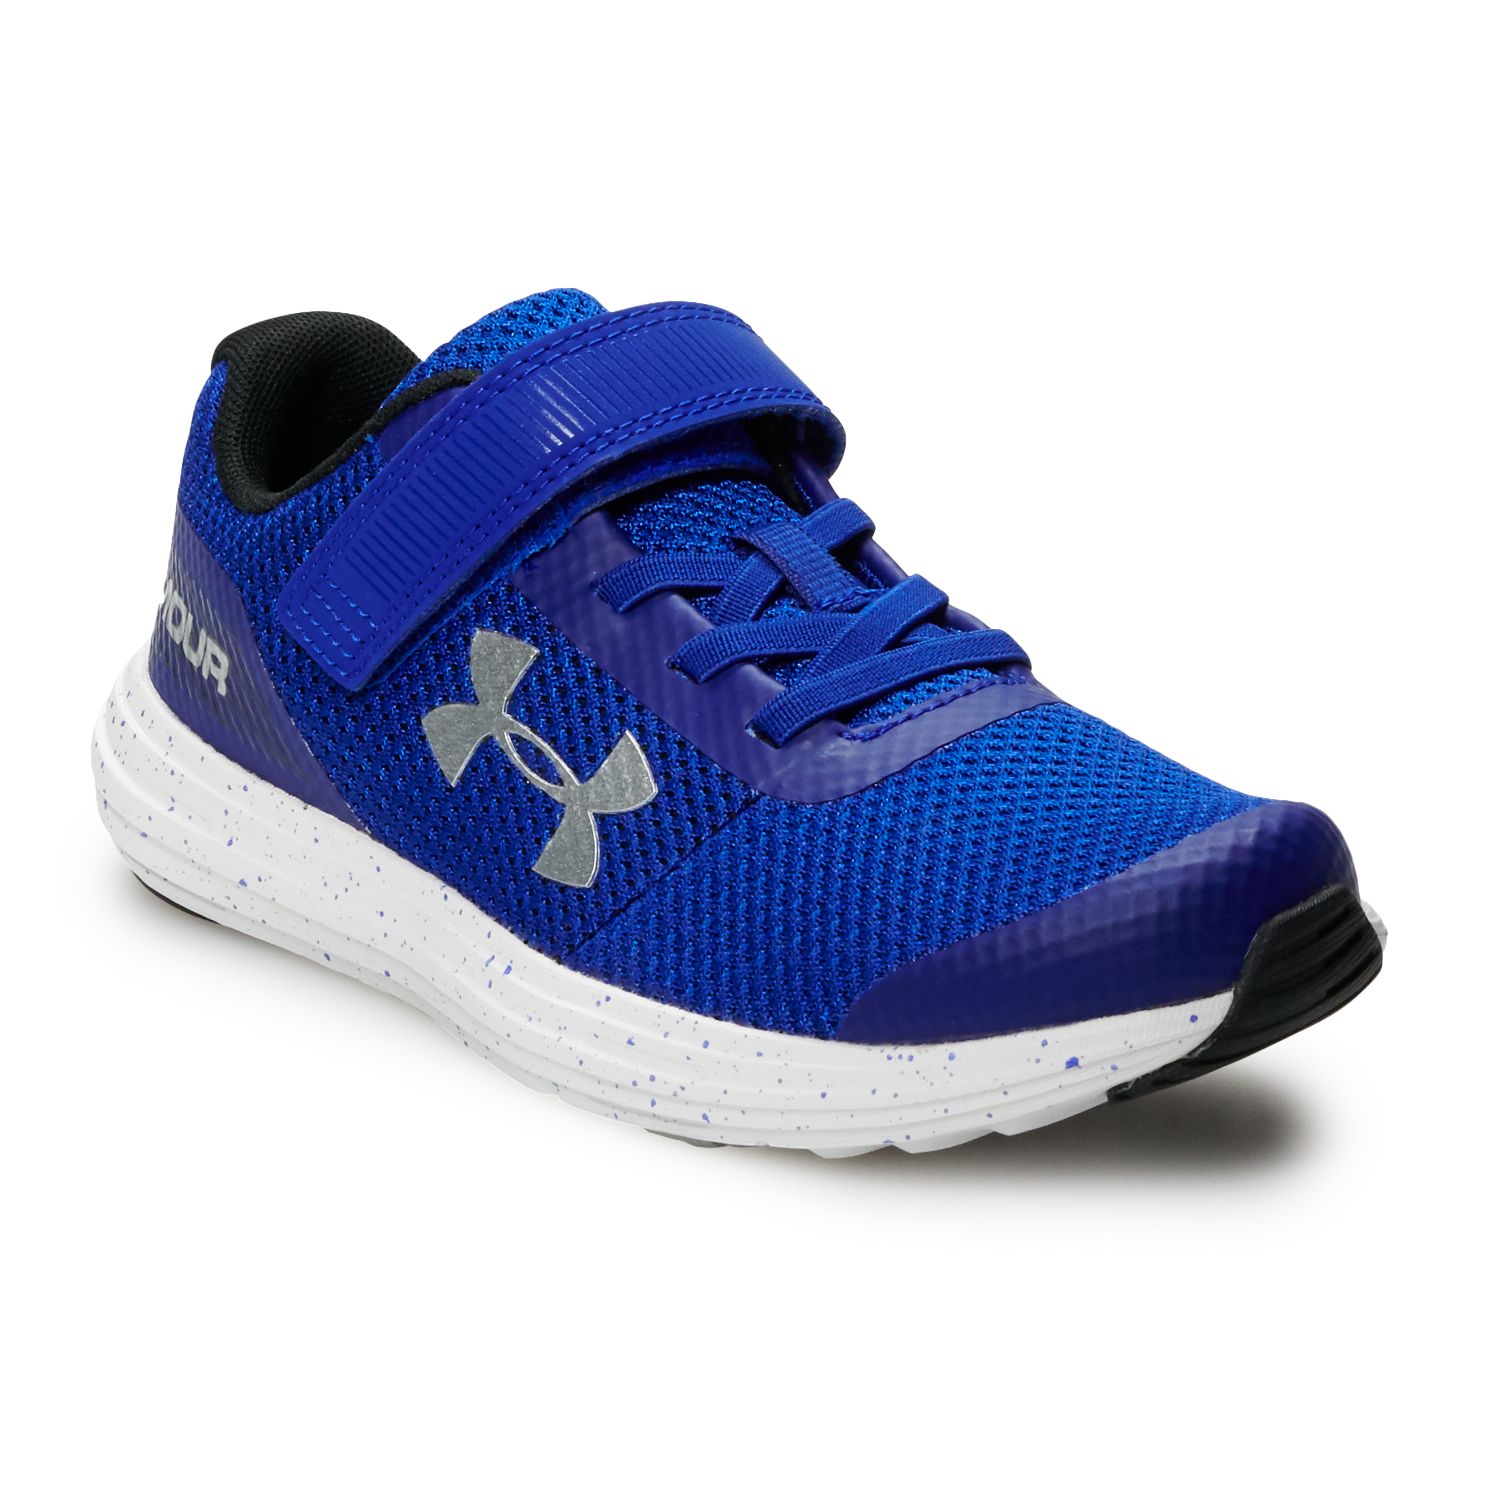 Boys' Under Armour Shoes: Kick His 